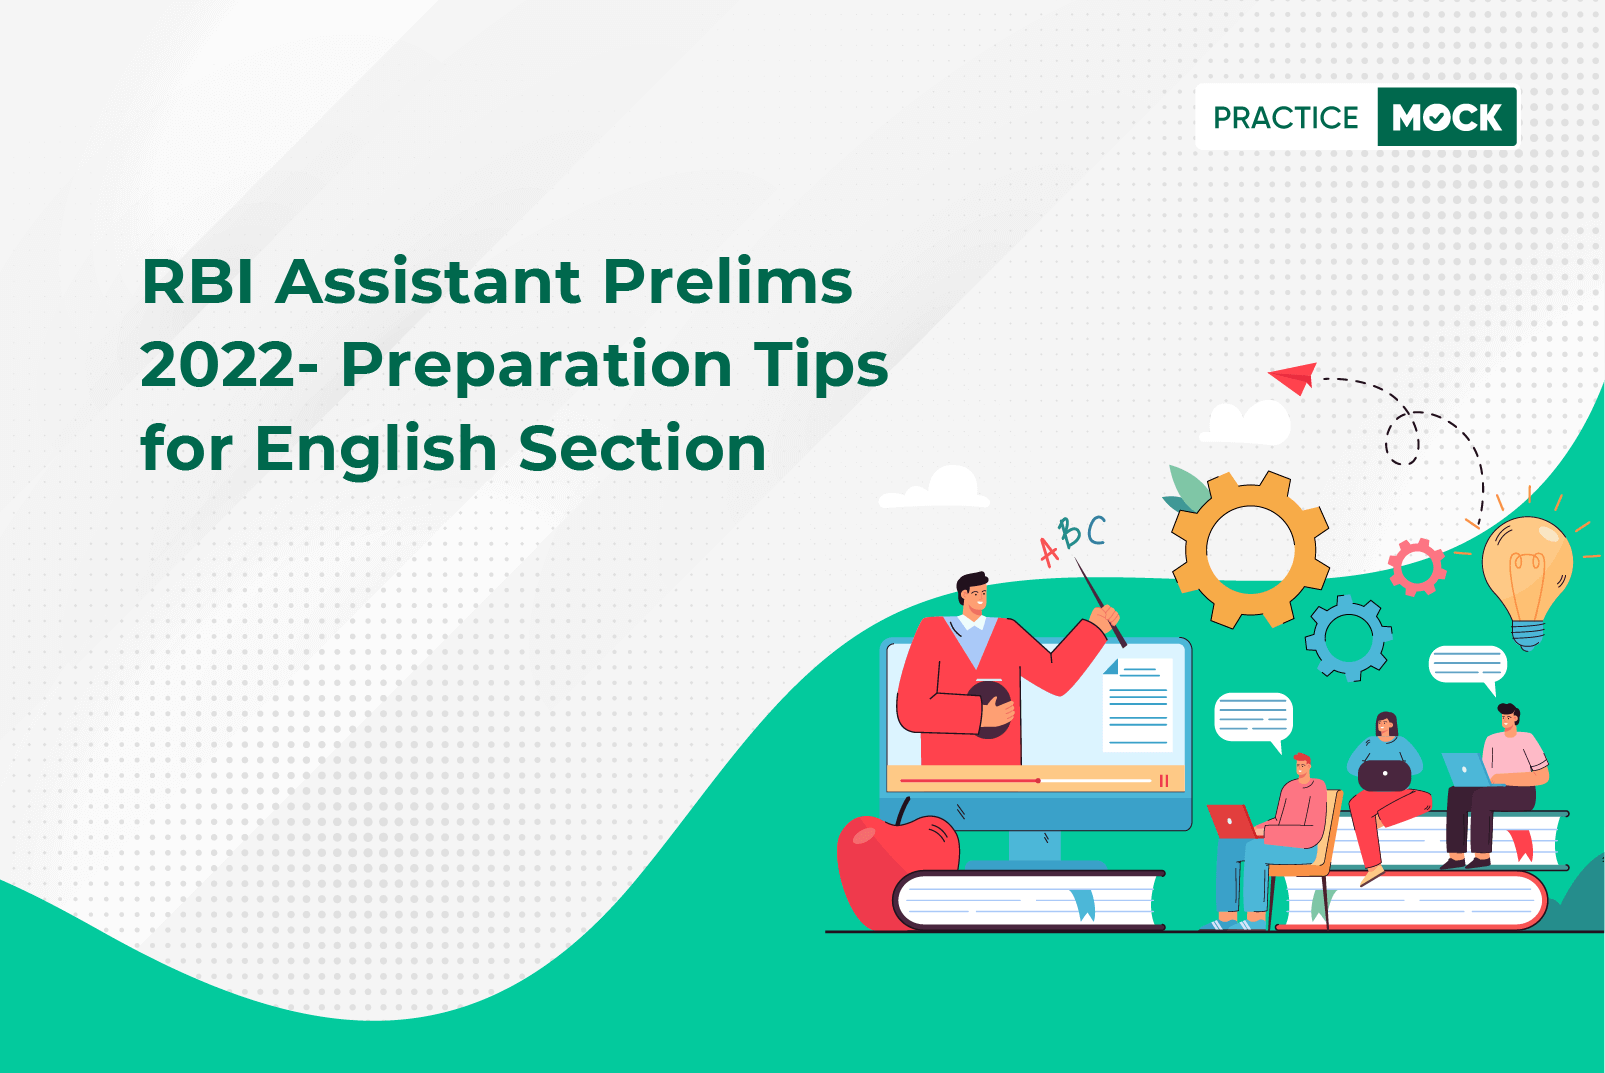 RBI Assistant English Preparation Tips